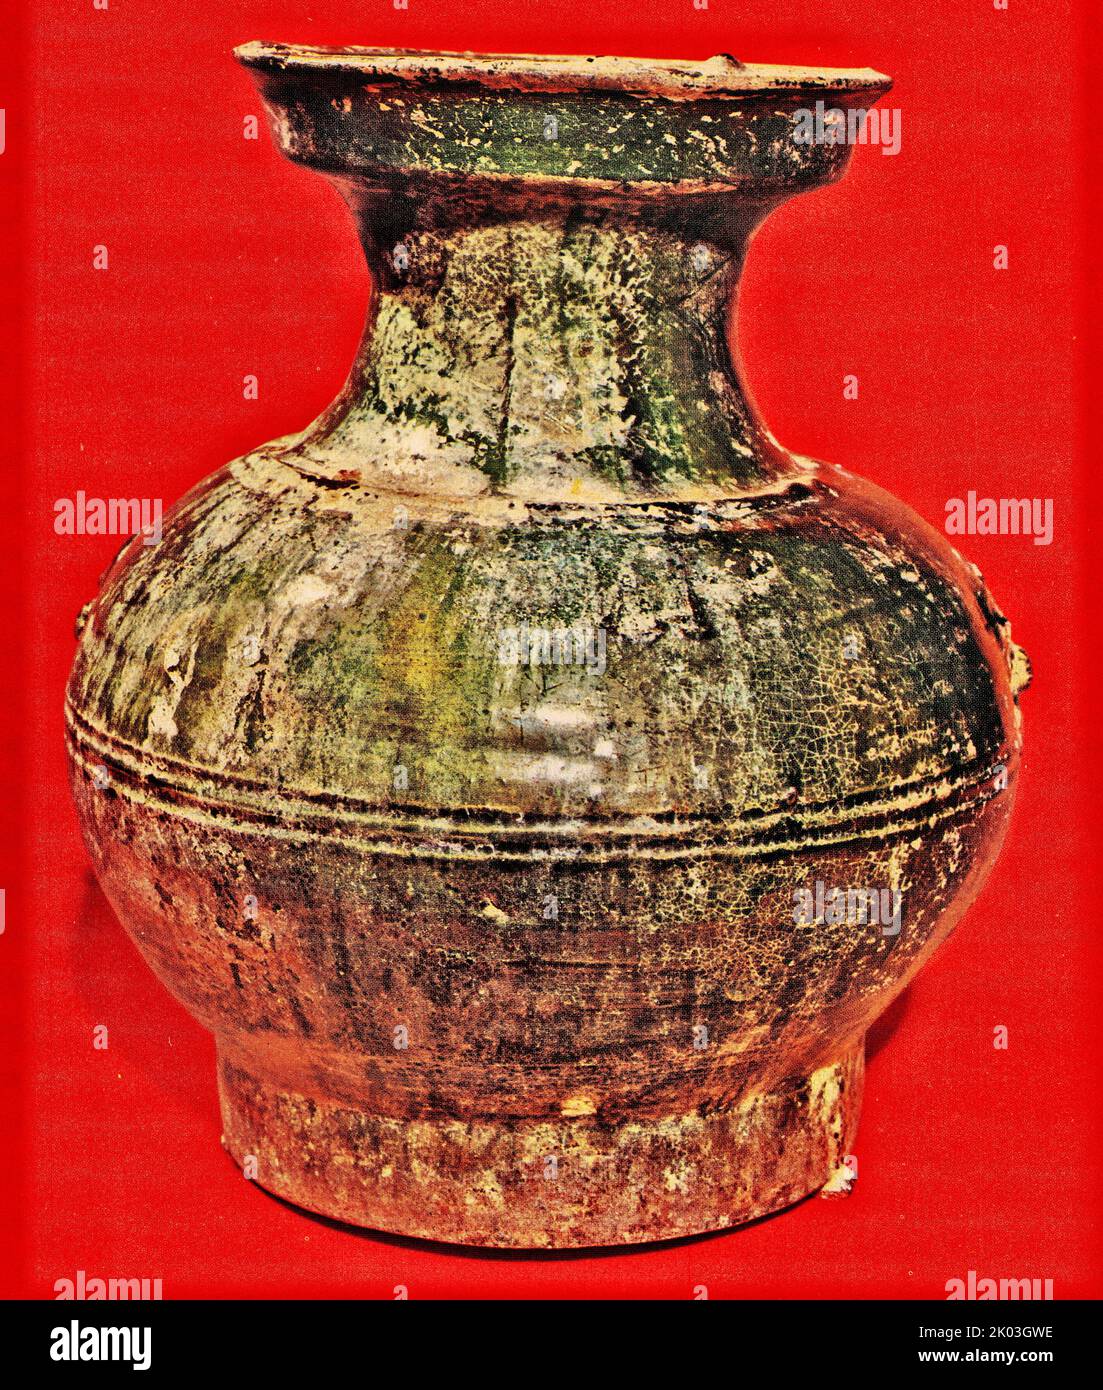 The round body has a slender neck and a flaring lip, and curves down to the round flat base. This jar is decorated with grooves and low relief beasts. Parts of the green glaze has faded, the rest invited a layer of iridescent colours due to chemical changes while it was underground. It was fired at high temperature. Stock Photo